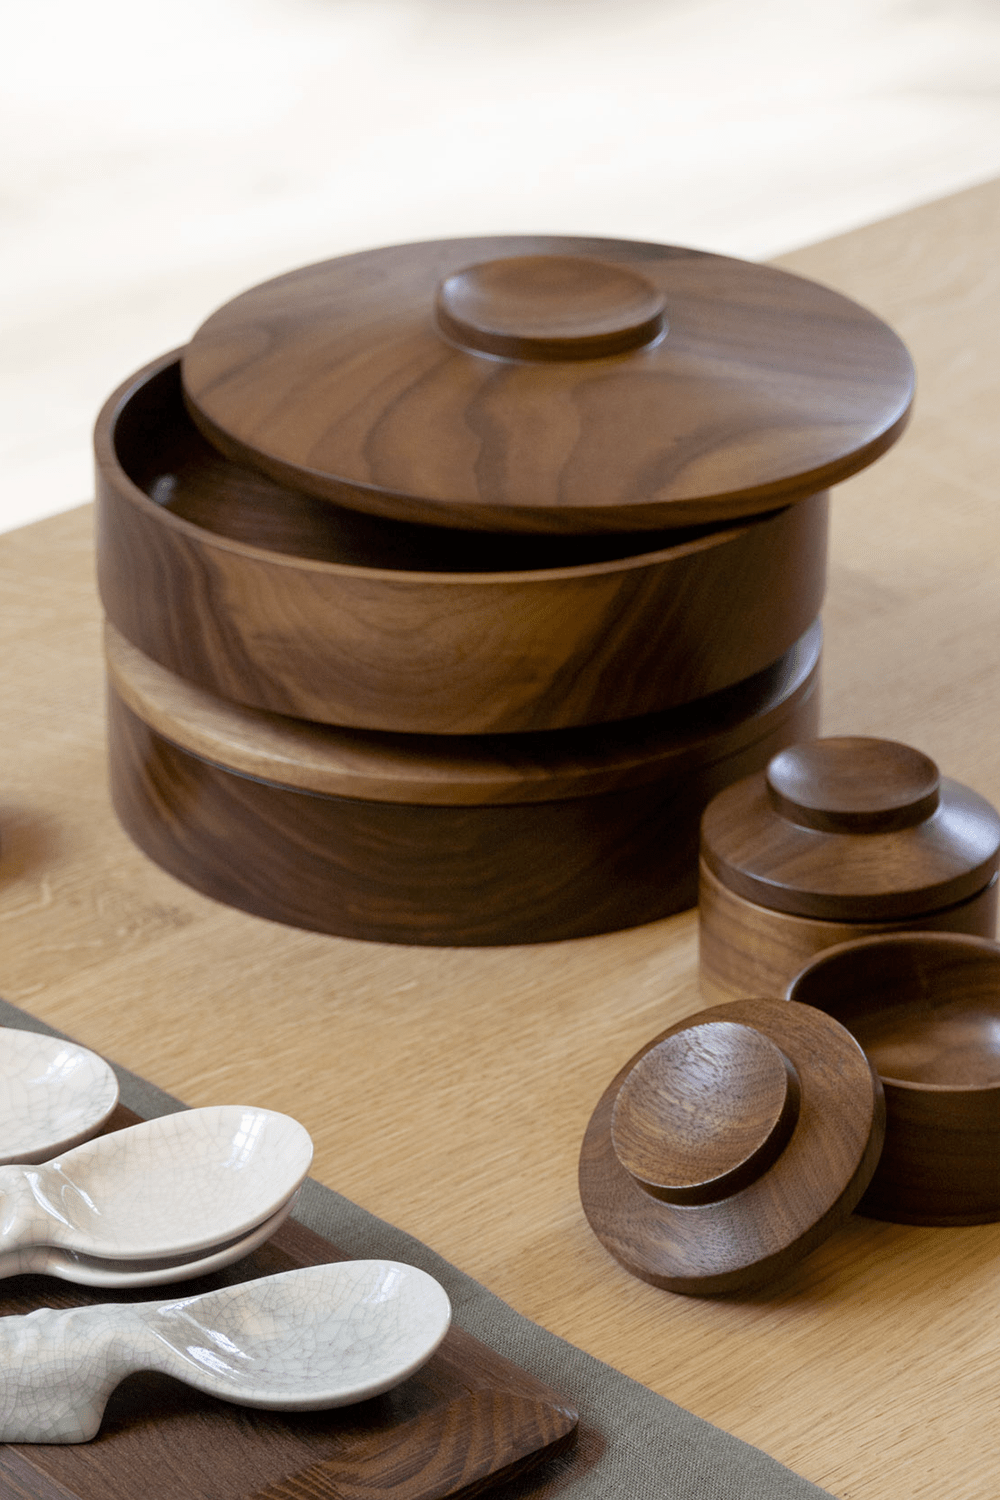 Repeat Stackable Cookie Jars by Het Houtlokaal - A set of dark walnut wood jars, hand-turned and modular. The stackable design allows for easy storage and a striking centrepiece.